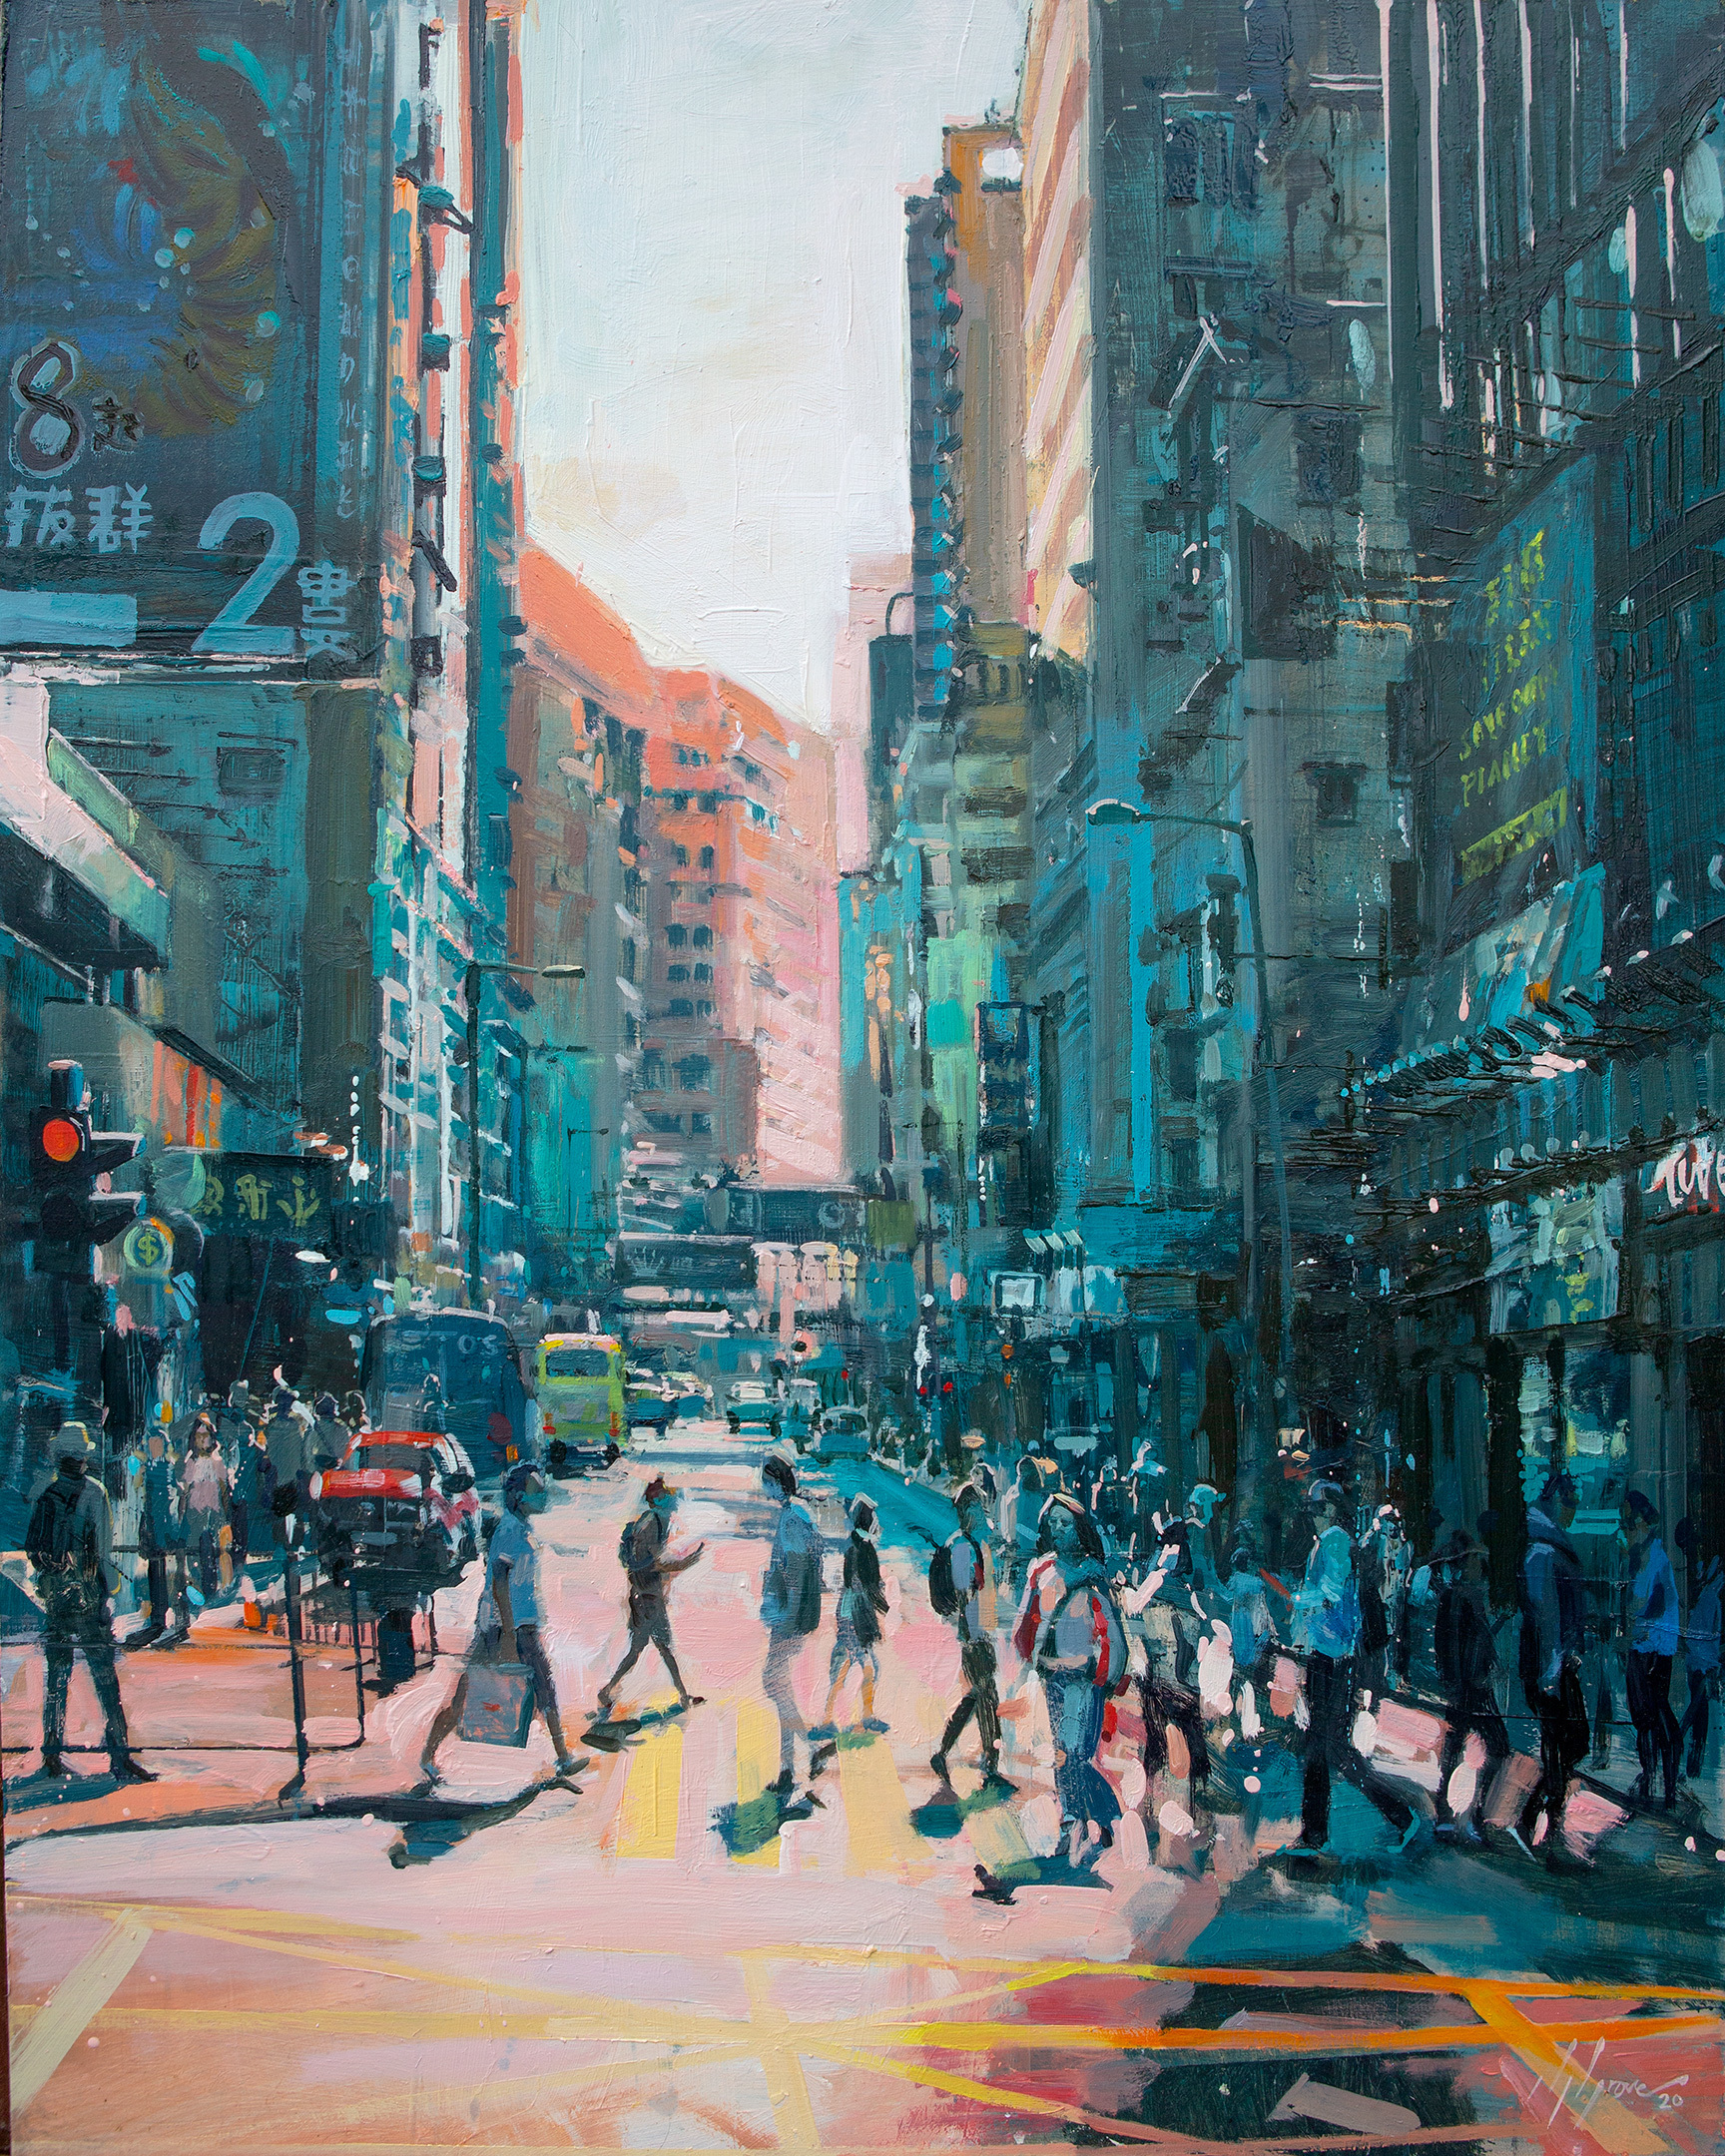 Hong Kong paintings by urban impressionist oil painter Nick Grove.